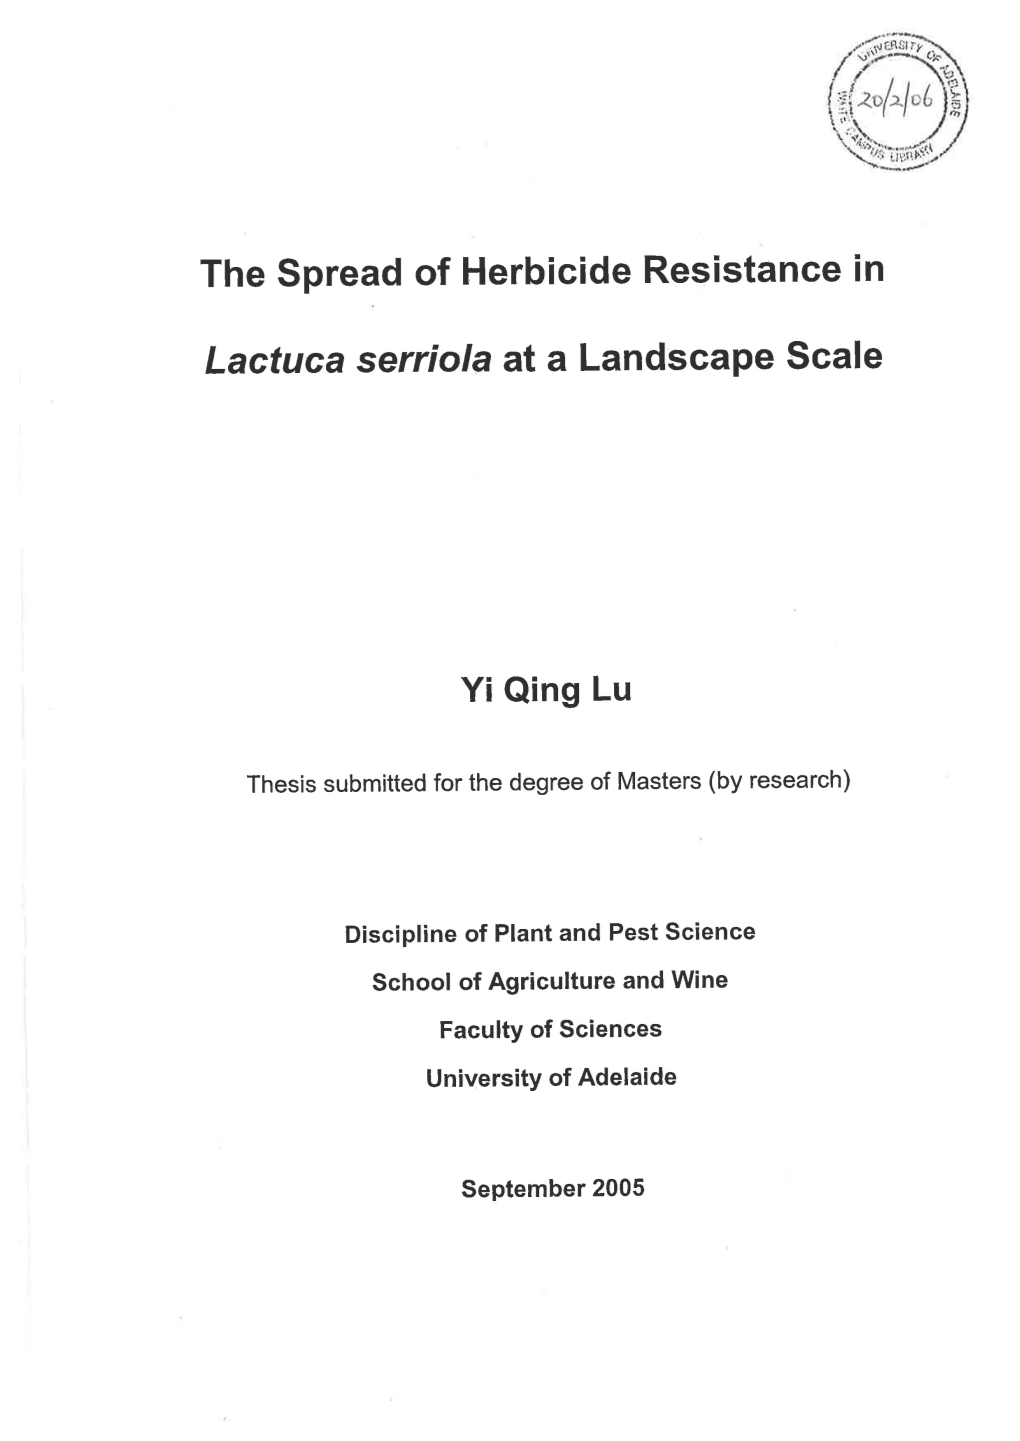 The Spread of Herbicide Resistance in Lactuca Serriola at a Landscape Scale